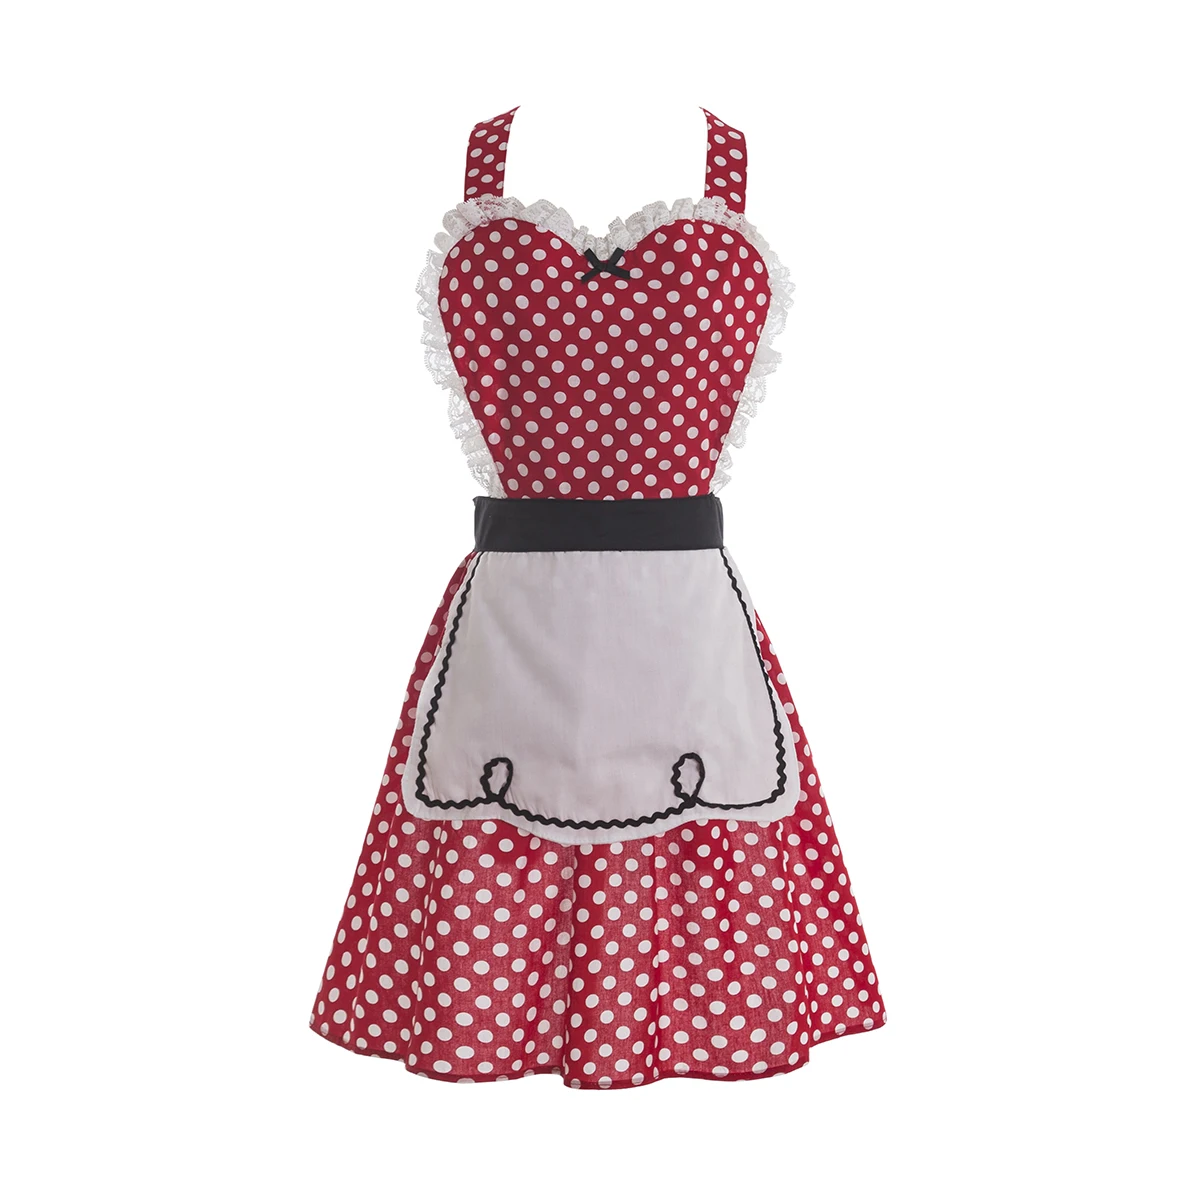 

plus size t-shirt opening ceremony clothing womens luxury clothing polka dots apron polka dots dress minnie mickey women aprons